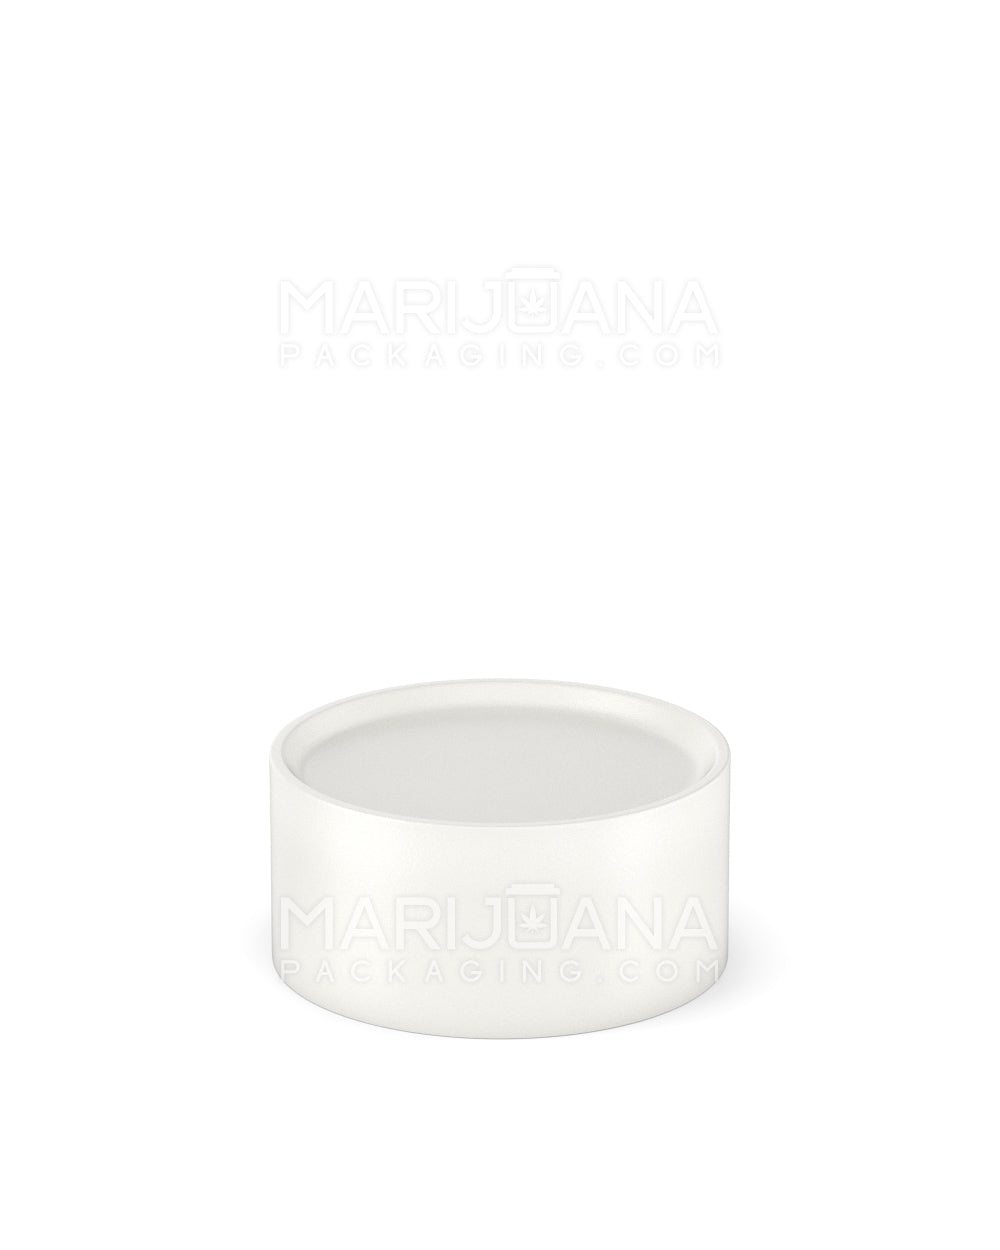 POLLEN GEAR | HiLine Child Resistant Smooth Push Down & Turn Plastic Scooped Caps w/ Foil Liner | 28mm - Matte White - 308 Count - 3